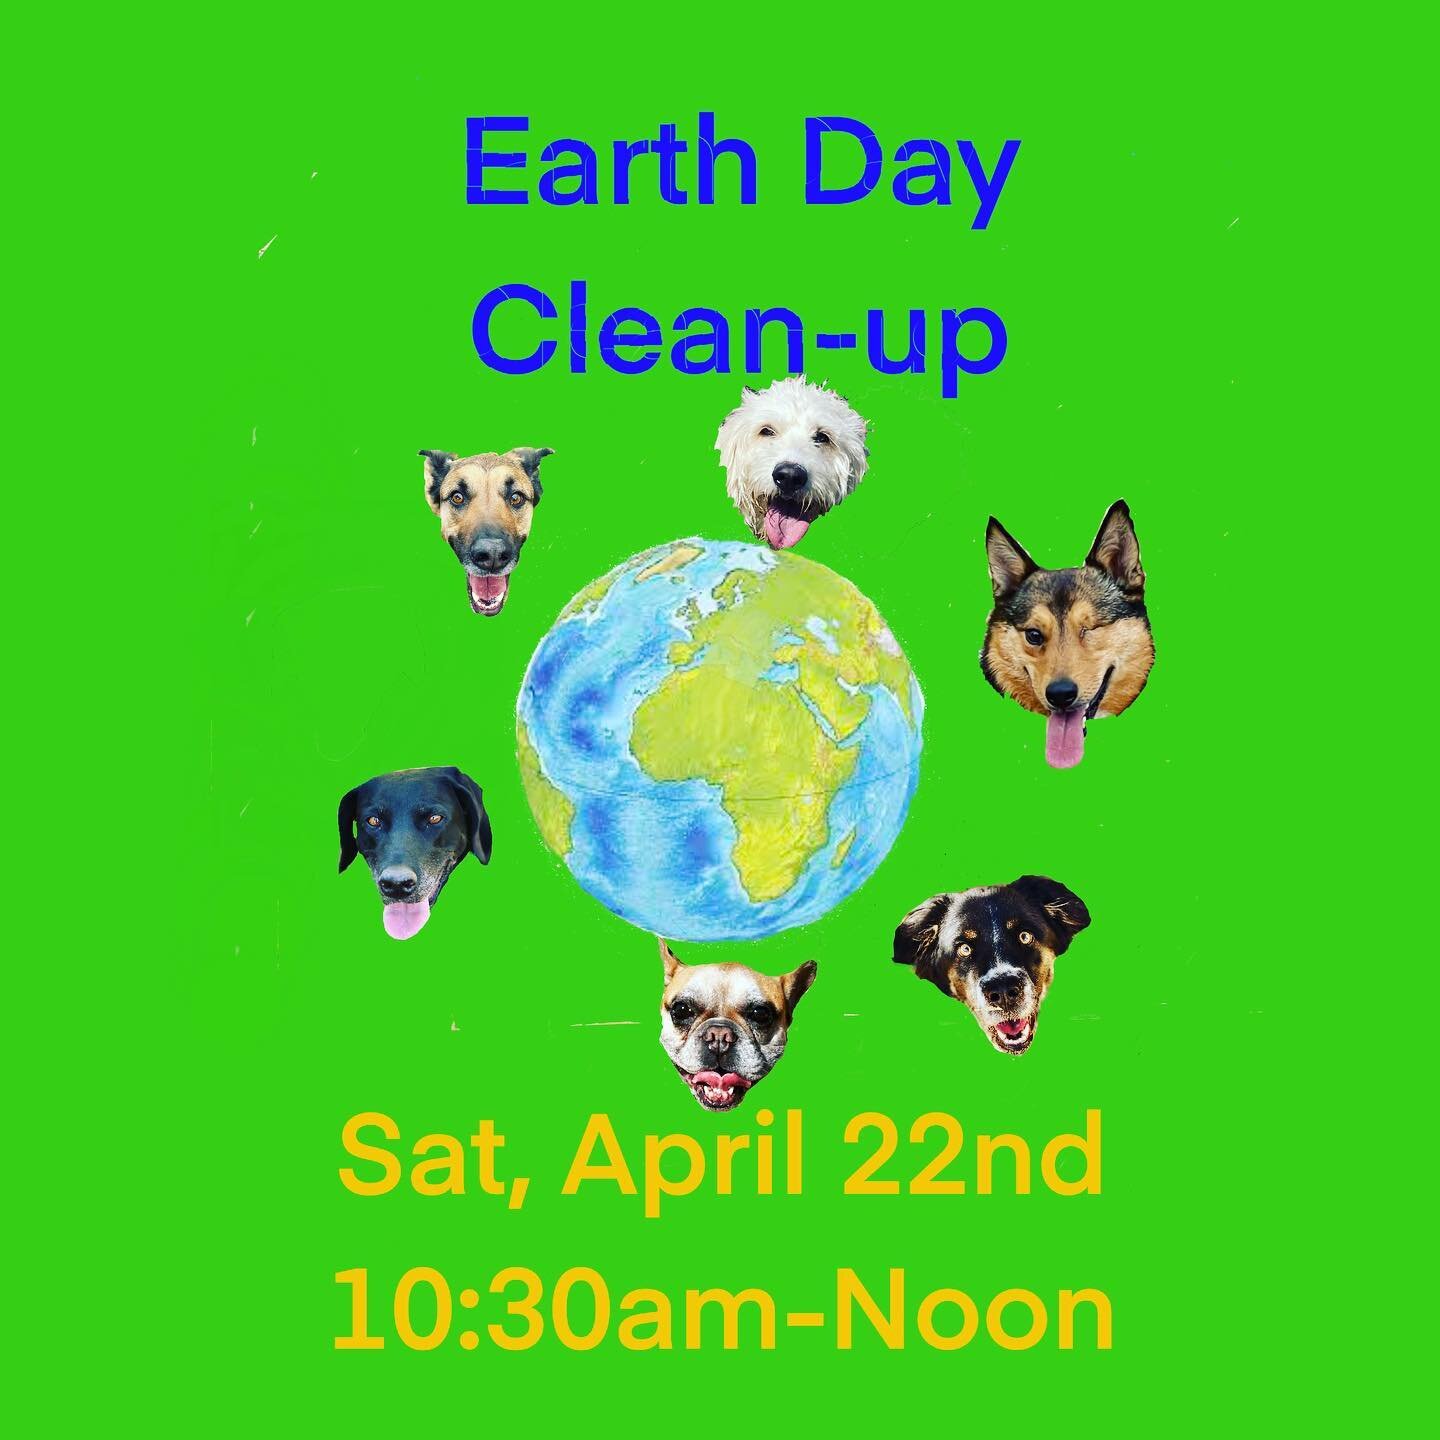 Join us for the annual Earth Day clean-up at the dog park! We will clean-up the dog park and streets surrounding the dog park we adopted as part of the Mayor&rsquo;s @cleancitydc program. As always, we will provide the trashbags,, gloves, brooms&hell